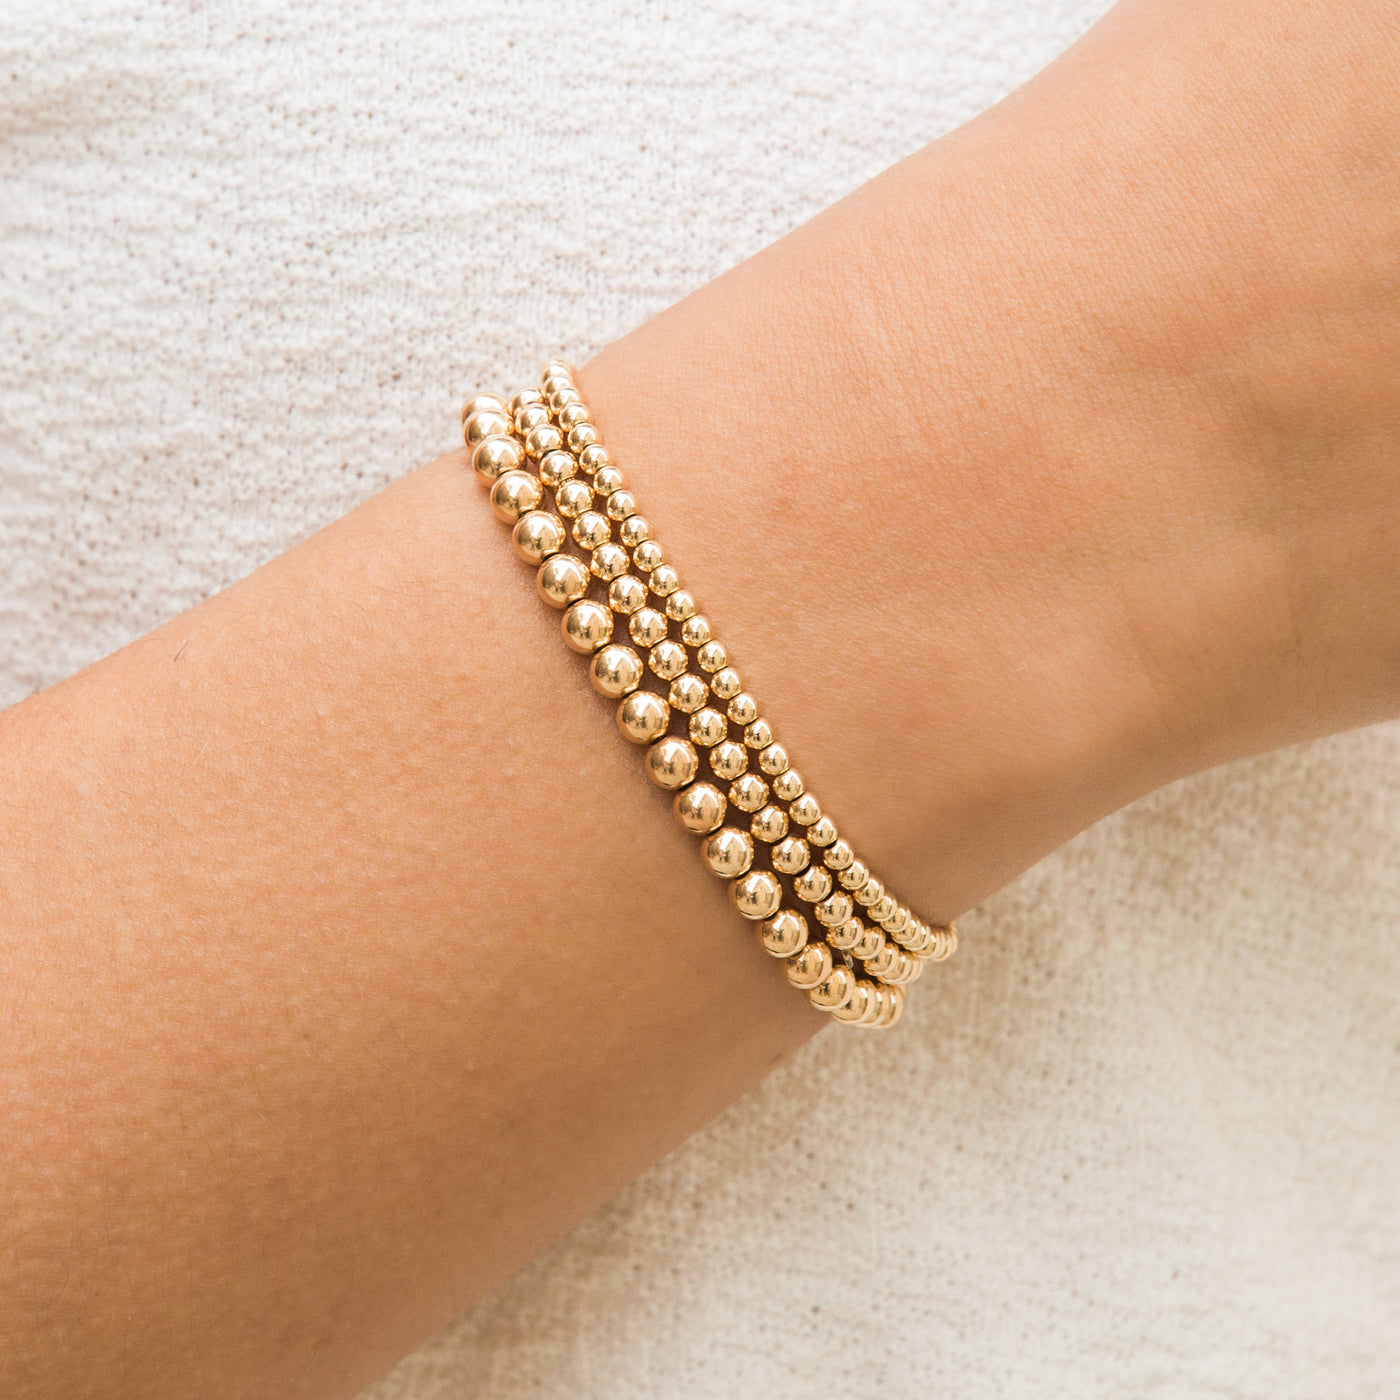 LAGOS 18K Yellow Gold Caviar Beaded Stretch Bracelets, 12mm | Bloomingdale's